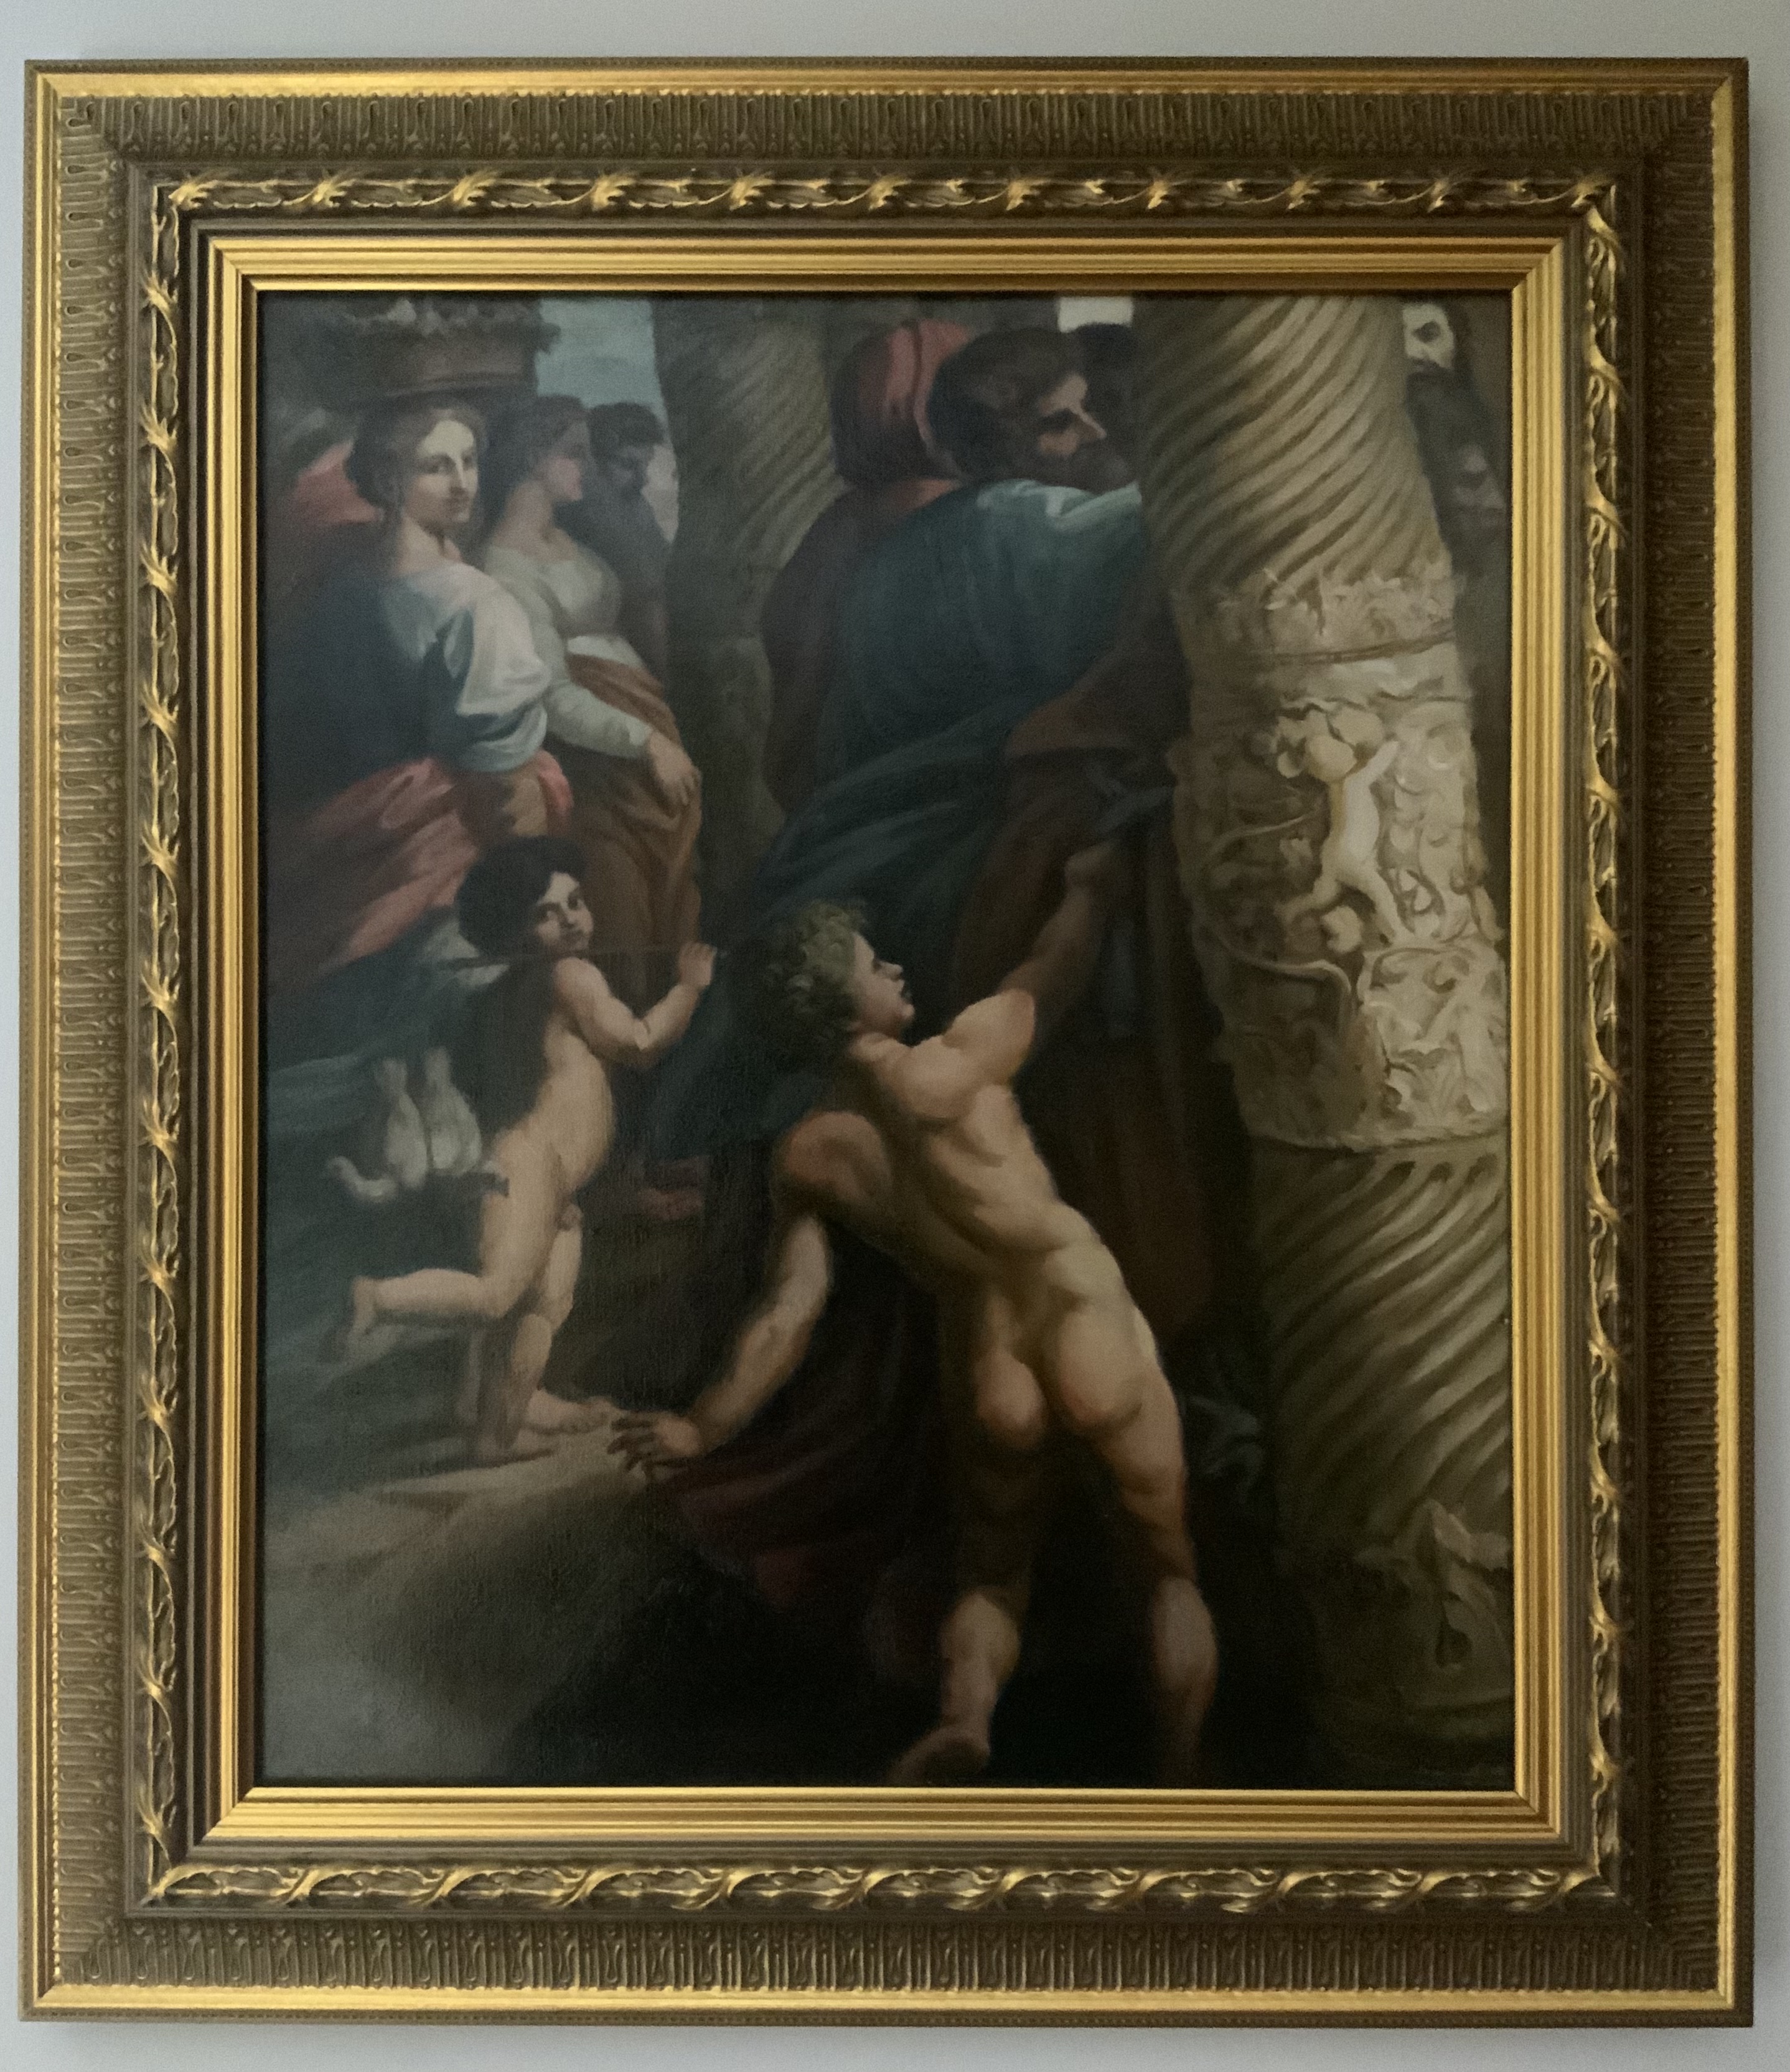 Attributed Biblical Painting Oil on Canvas Painting - Image 3 of 4